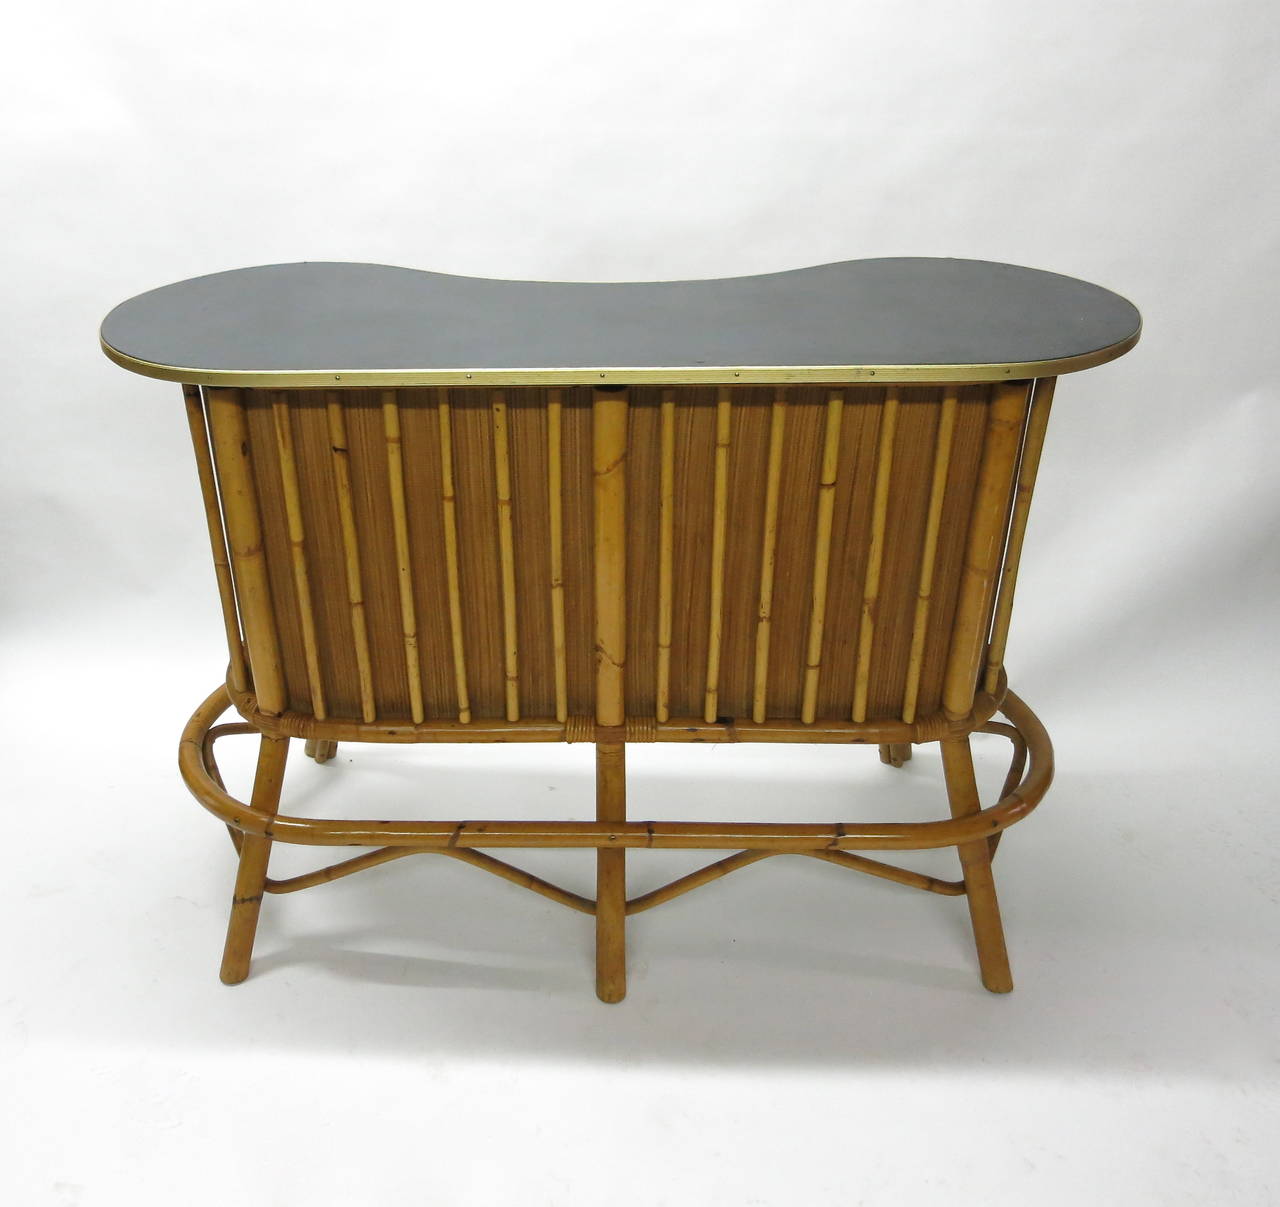 Vintage bar in wood and lacquered bamboo that has woven bamboo detailing on the front and a shelf in the back. The top of the bar is upholstered in black vinyl and trimmed with brass. The four stools are in the same bamboo tubing and the upholstered